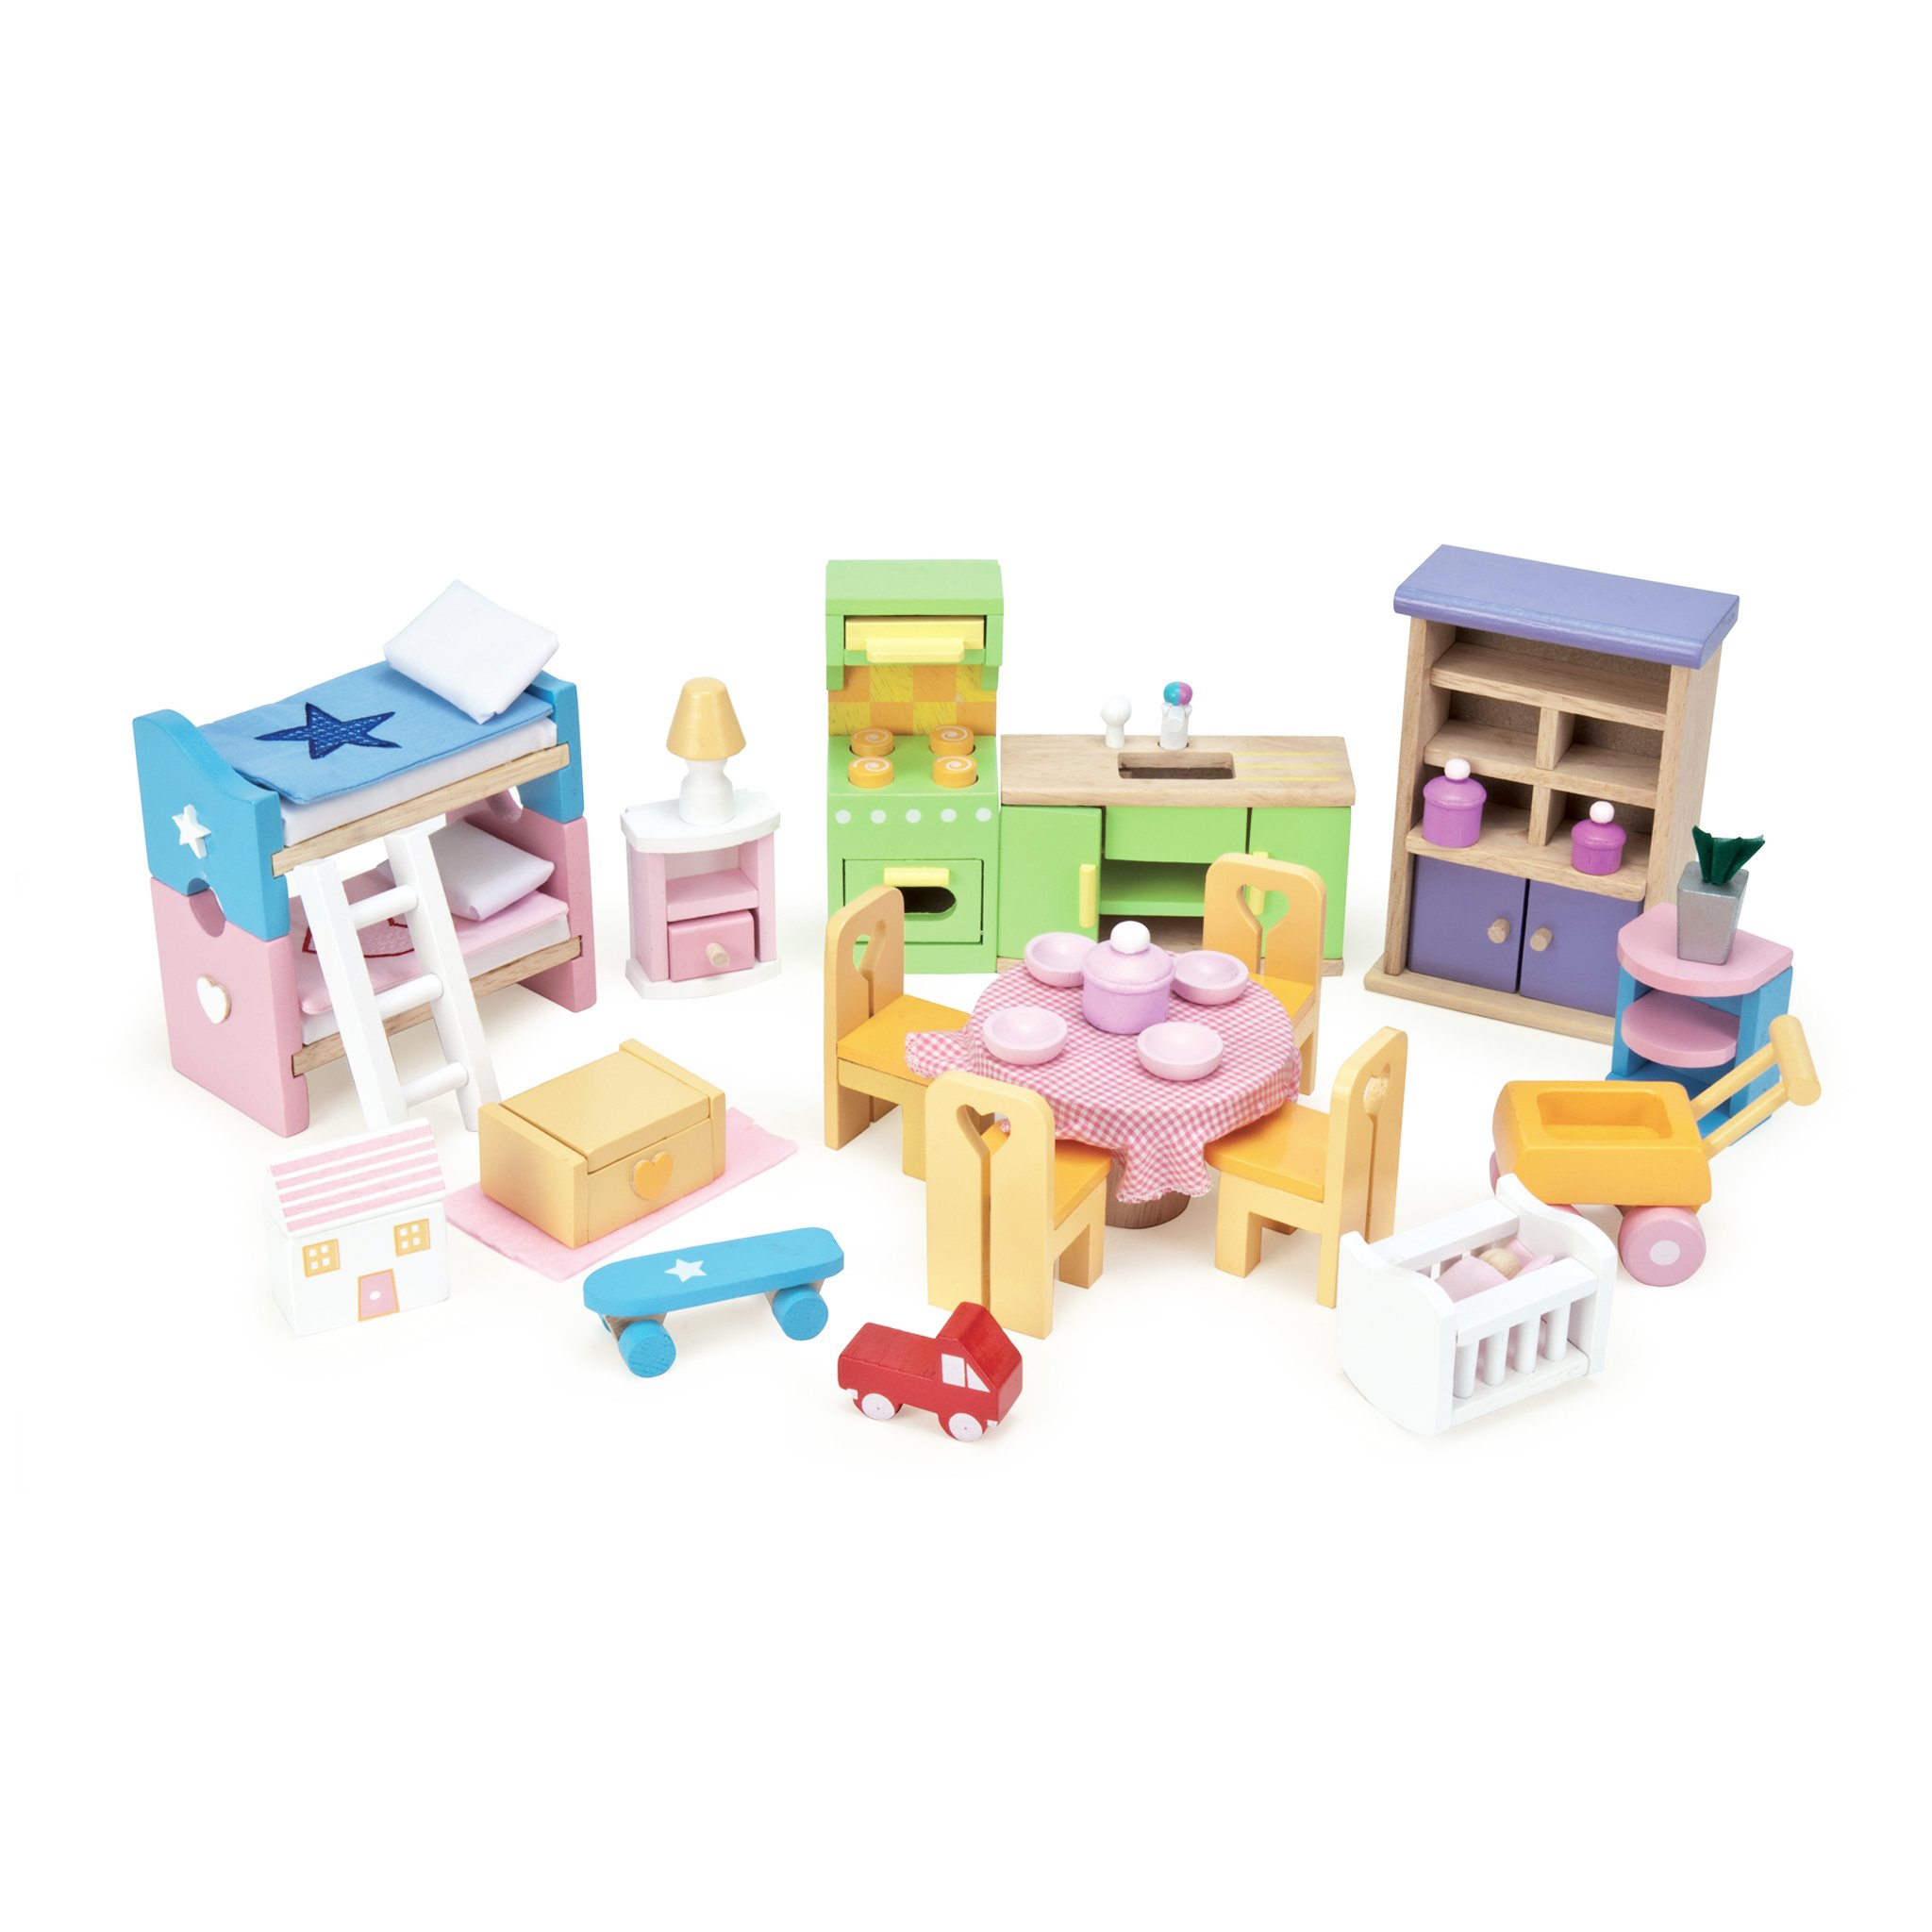 Le Toy Van 37 Piece Doll House Wooden Furniture Set